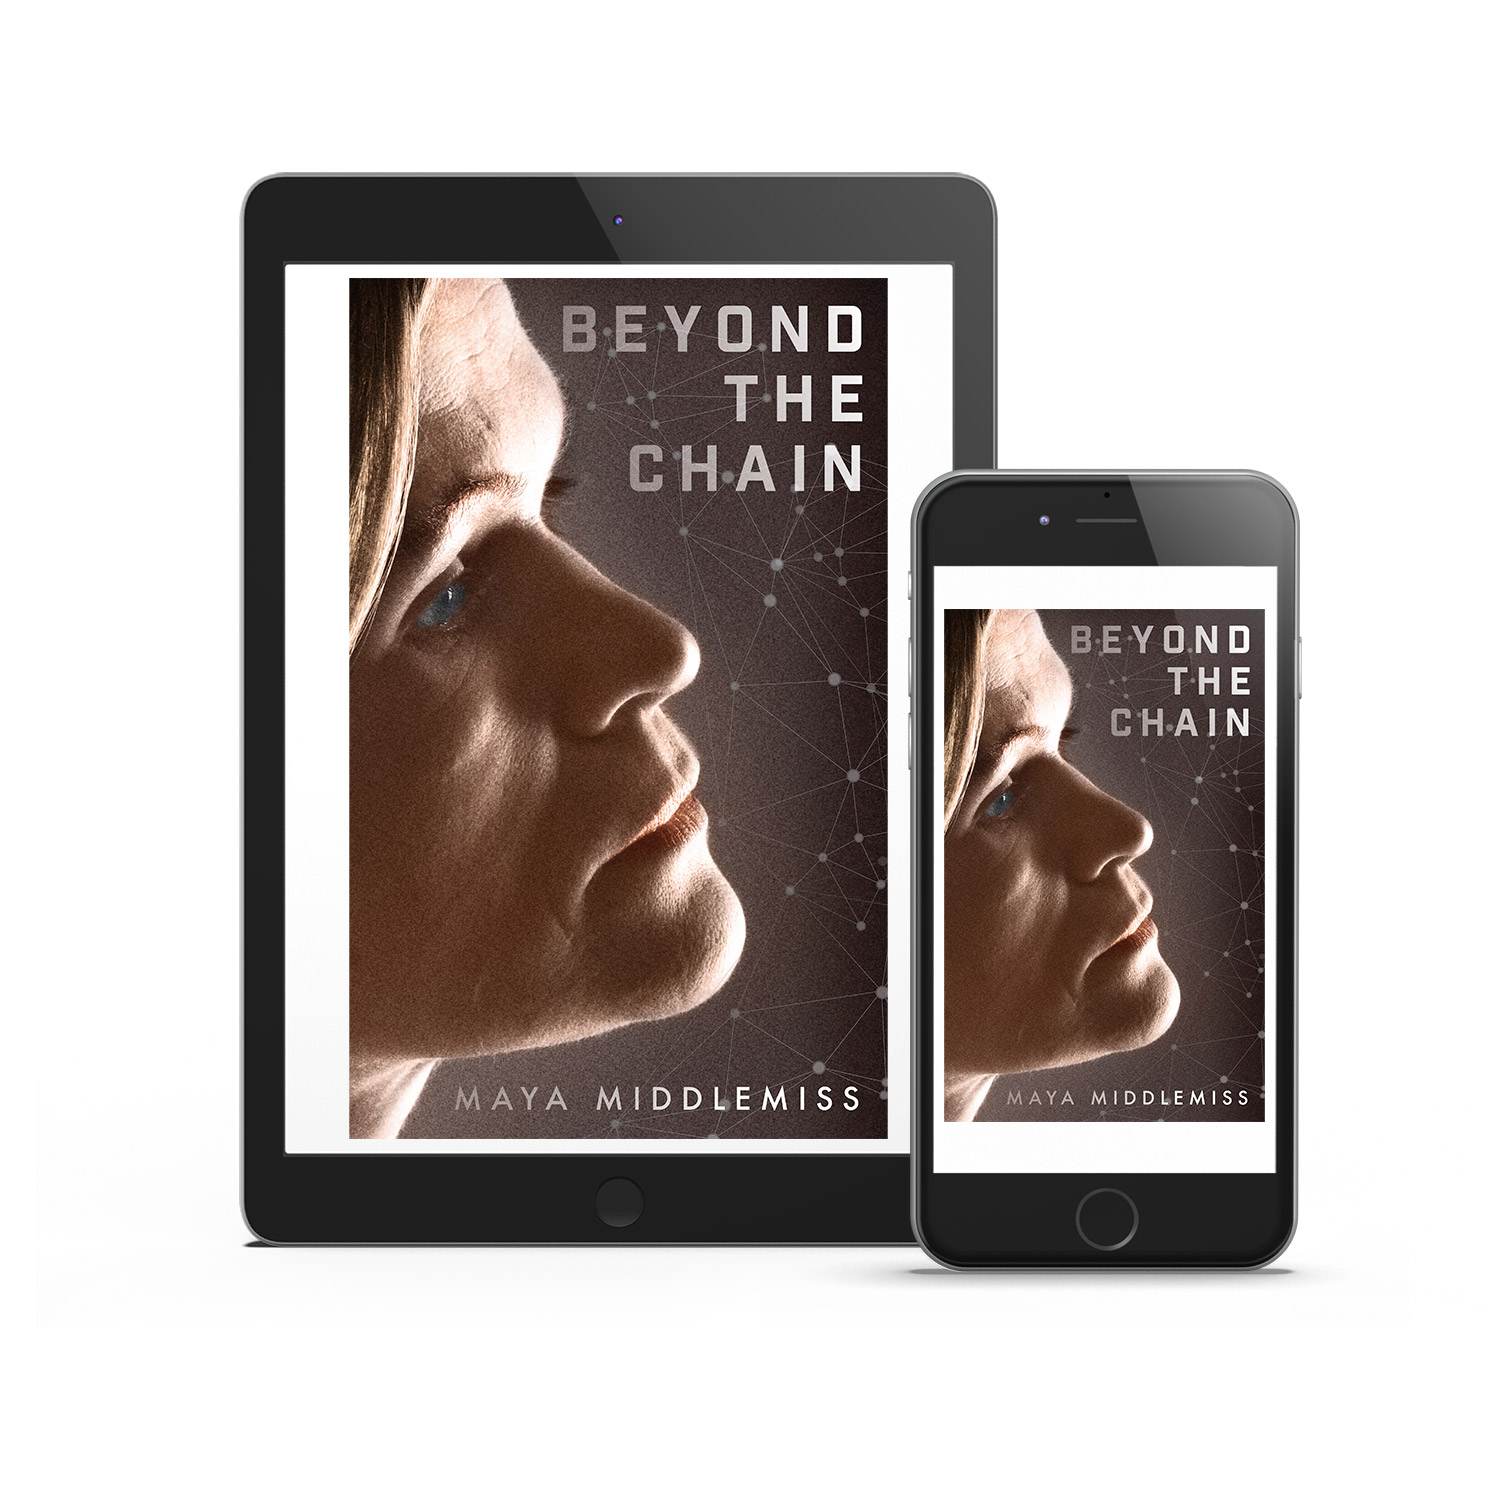 'Beyond The Chain' is a terrific female-led thriller. The author is Maya Middlemiss. The book cover design and interior formatting are by Mark Thomas. To learn more about what Mark could do for your book, please visit coverness.com.